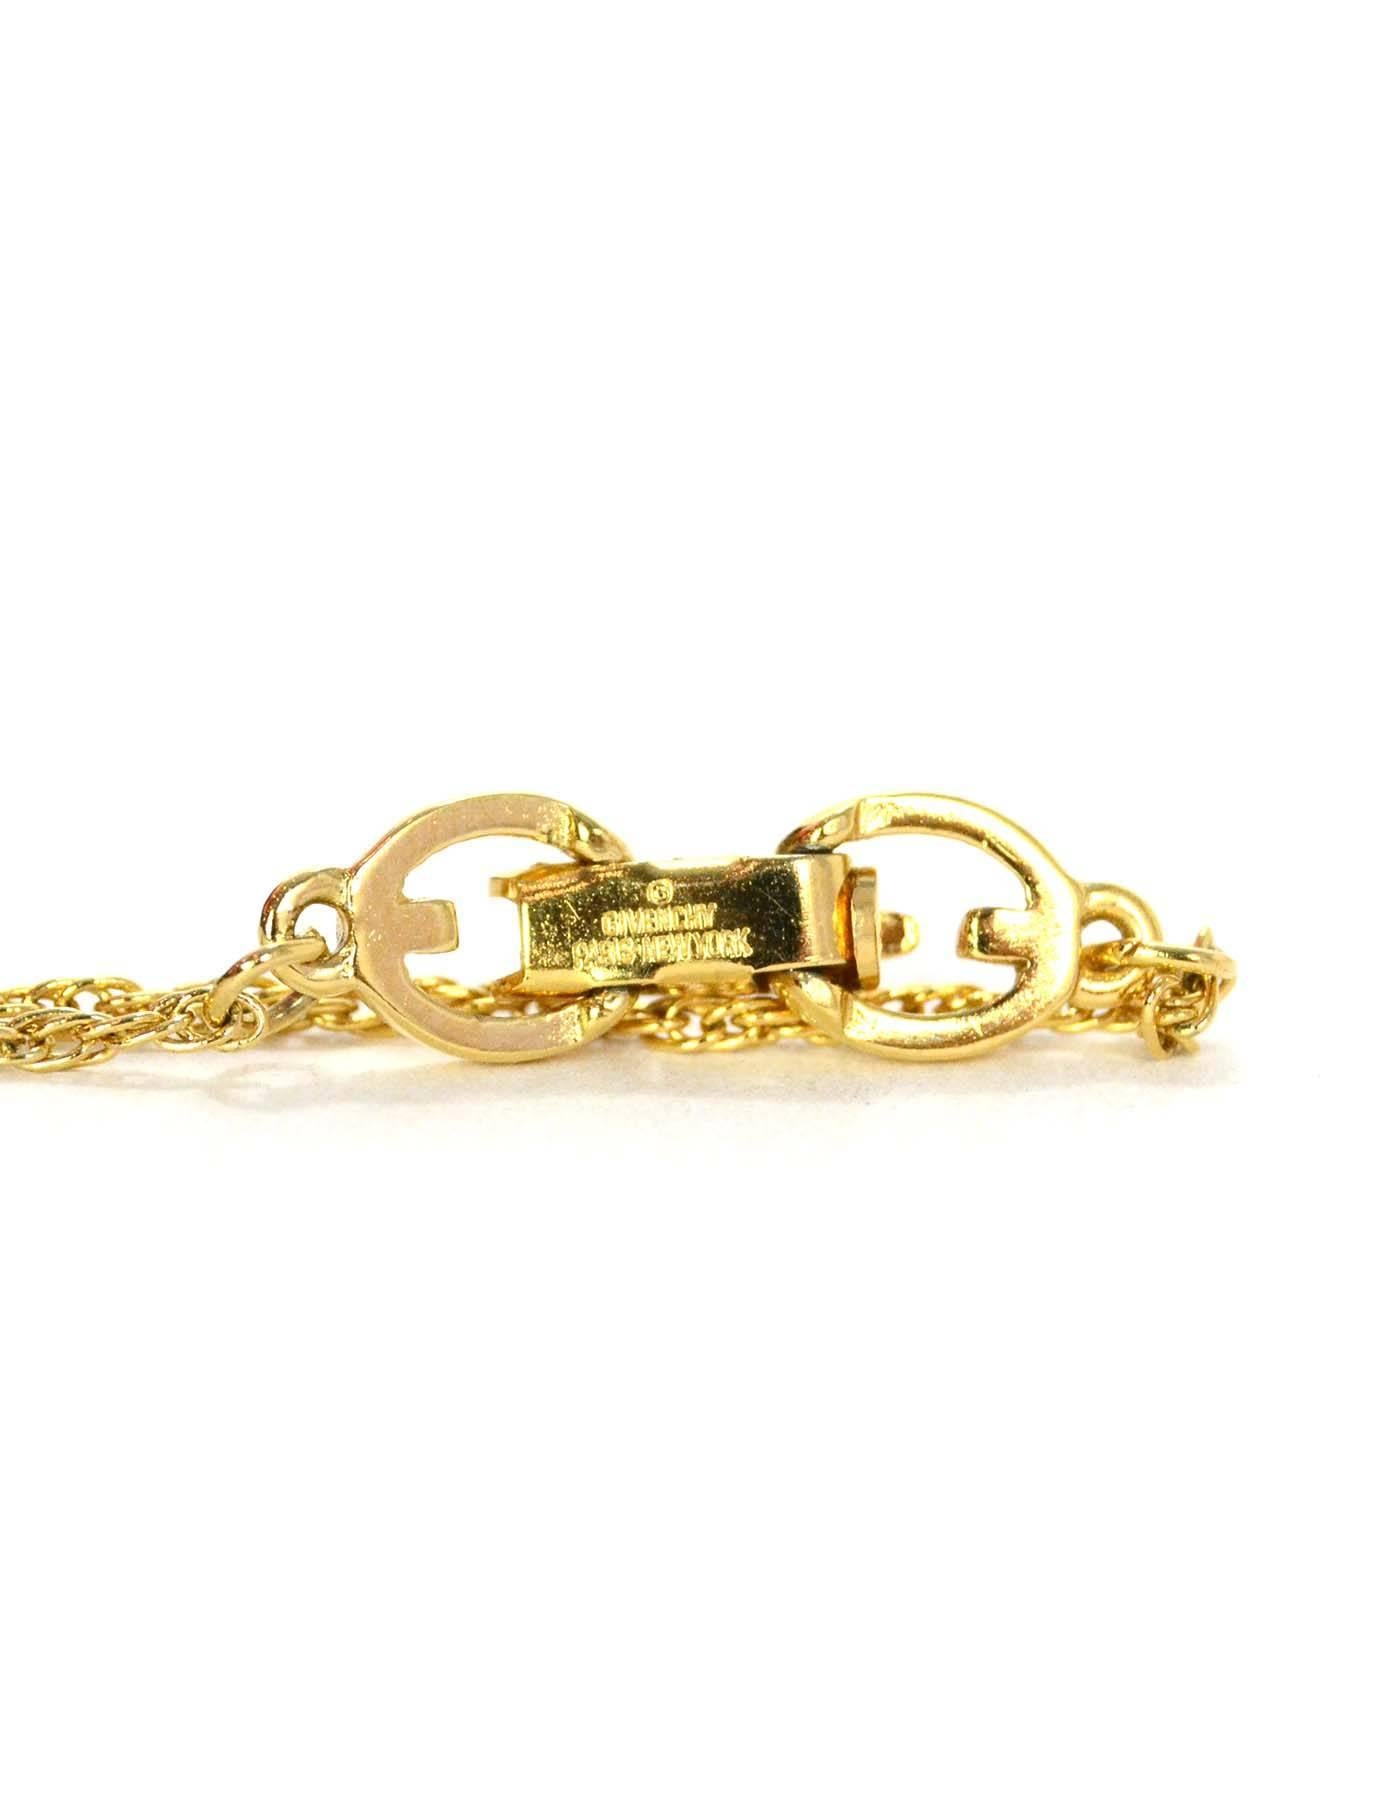 Women's or Men's Givenchy Gold & Crystal Vintage Pendant Necklace